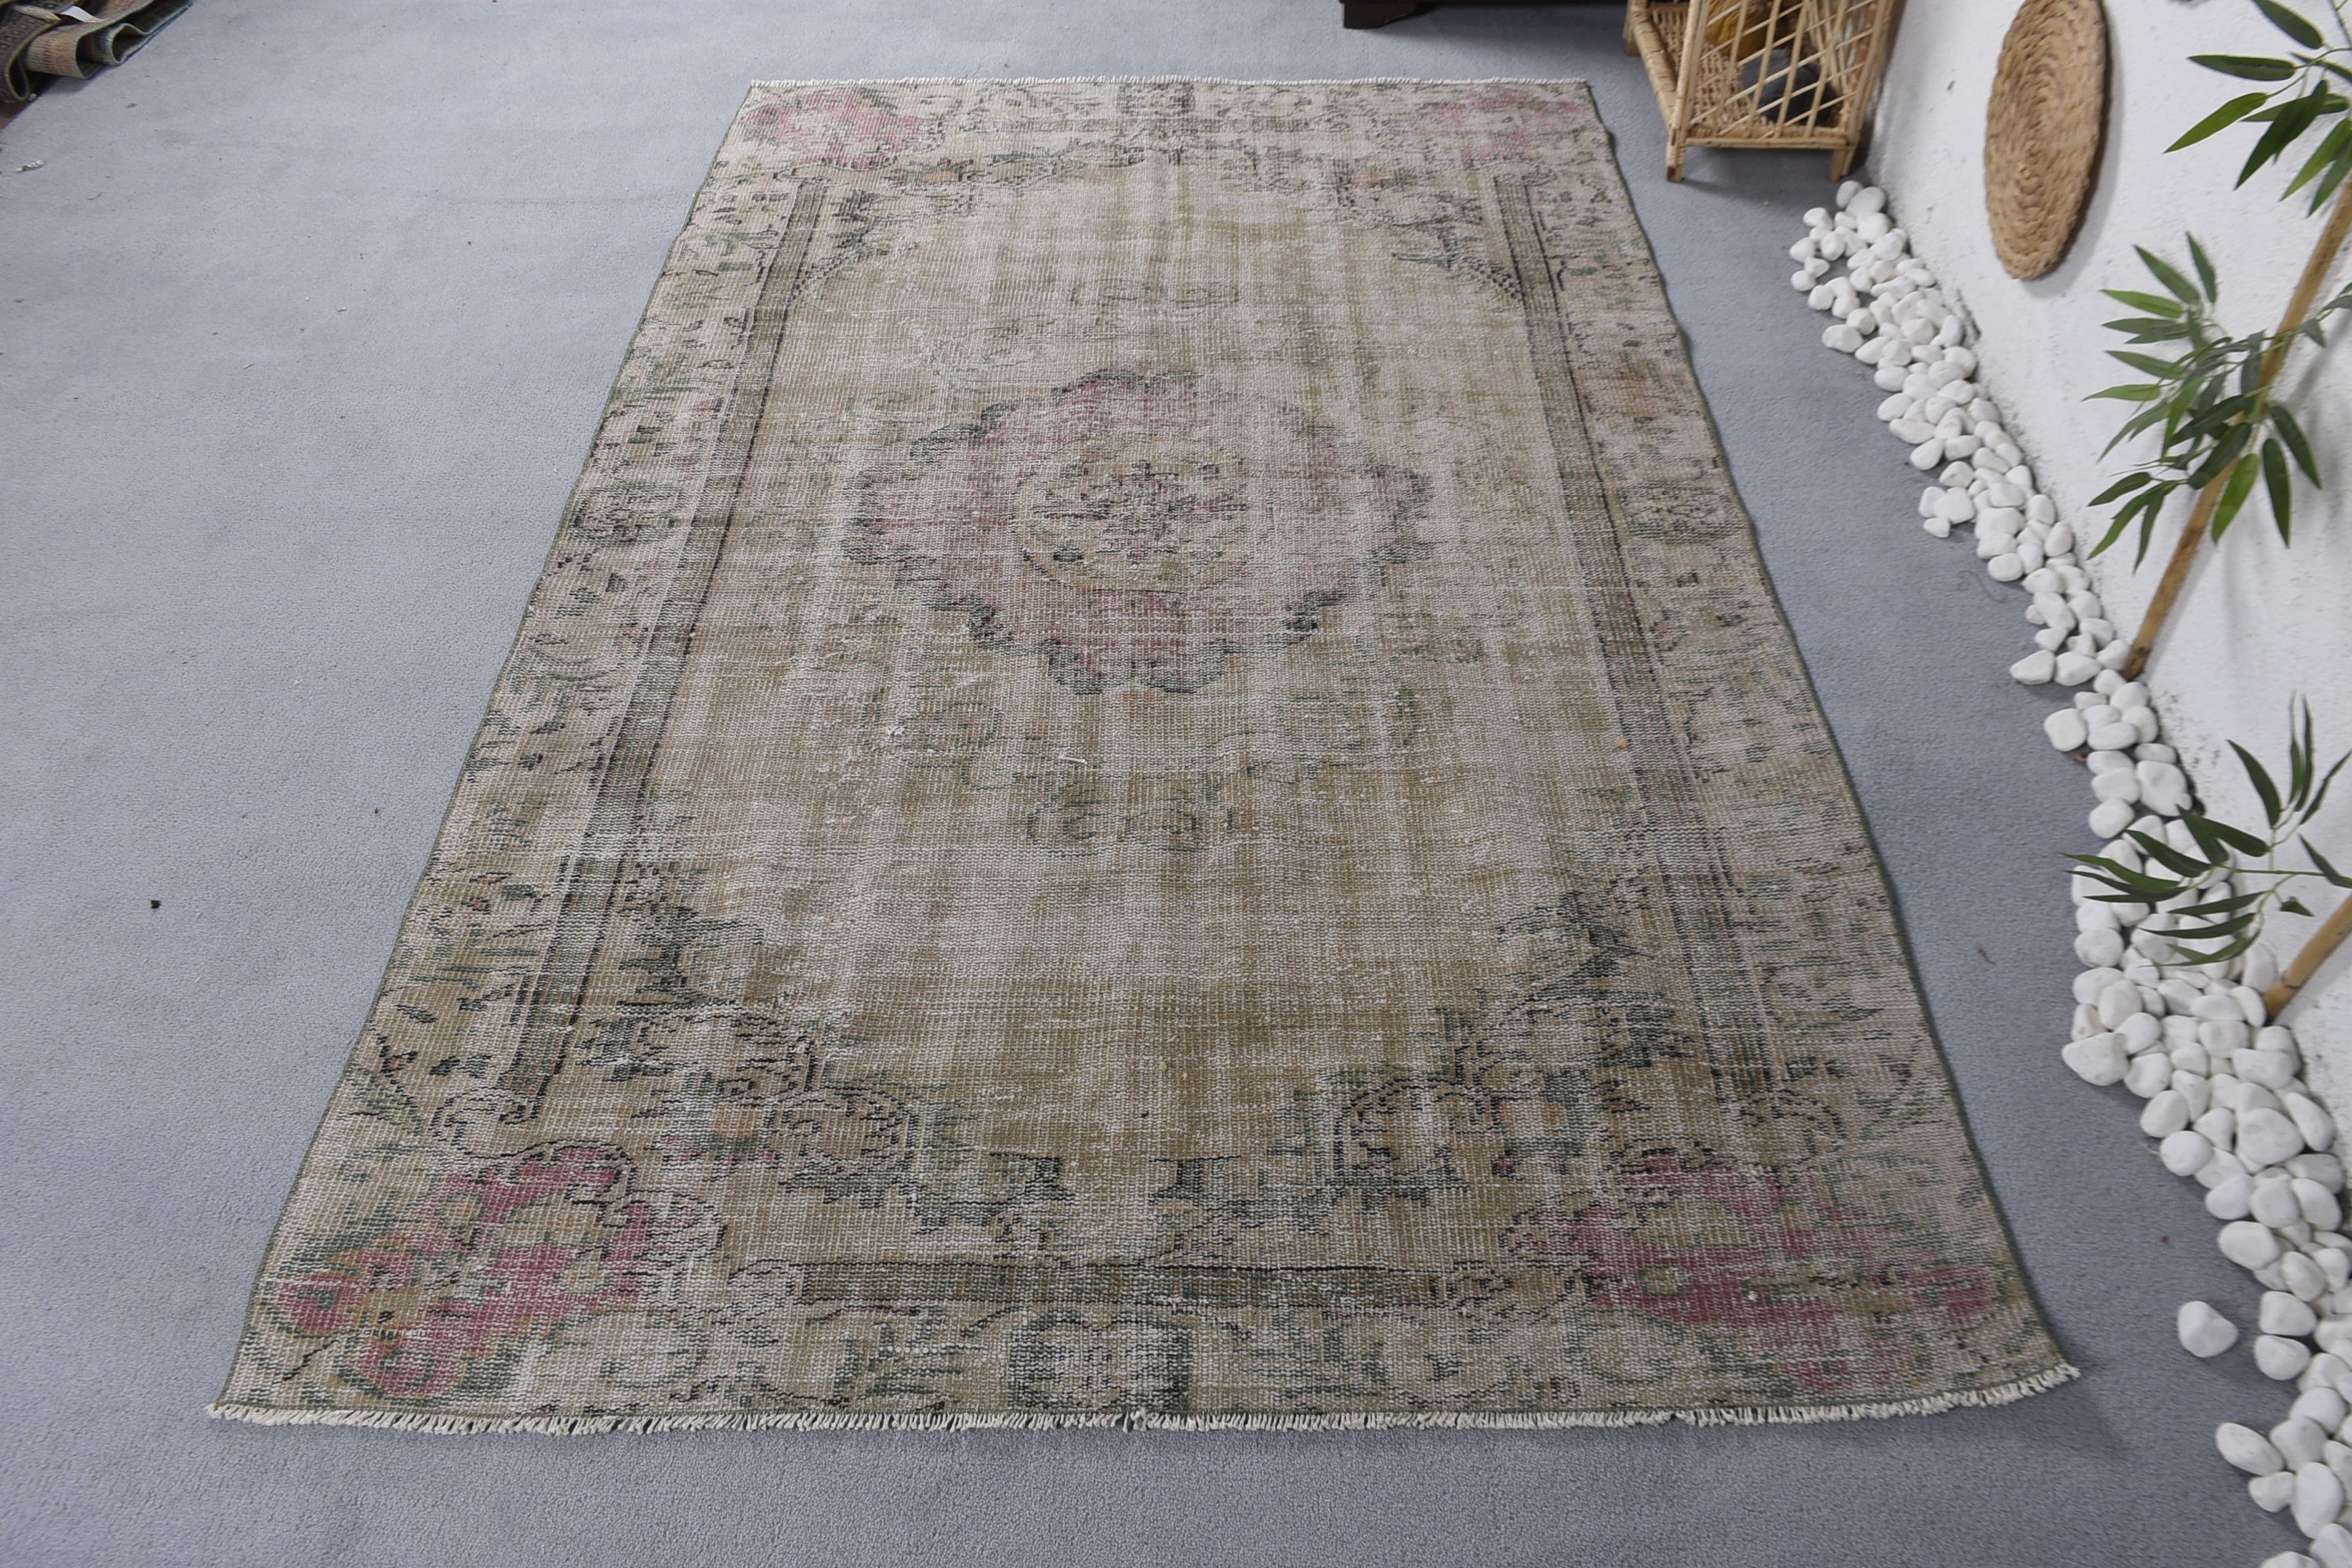 4.8x7.7 ft Area Rug, Green Antique Rugs, Anatolian Rugs, Natural Rugs, Dining Room Rug, Turkish Rug, Antique Rug, Vintage Rug, Kitchen Rug